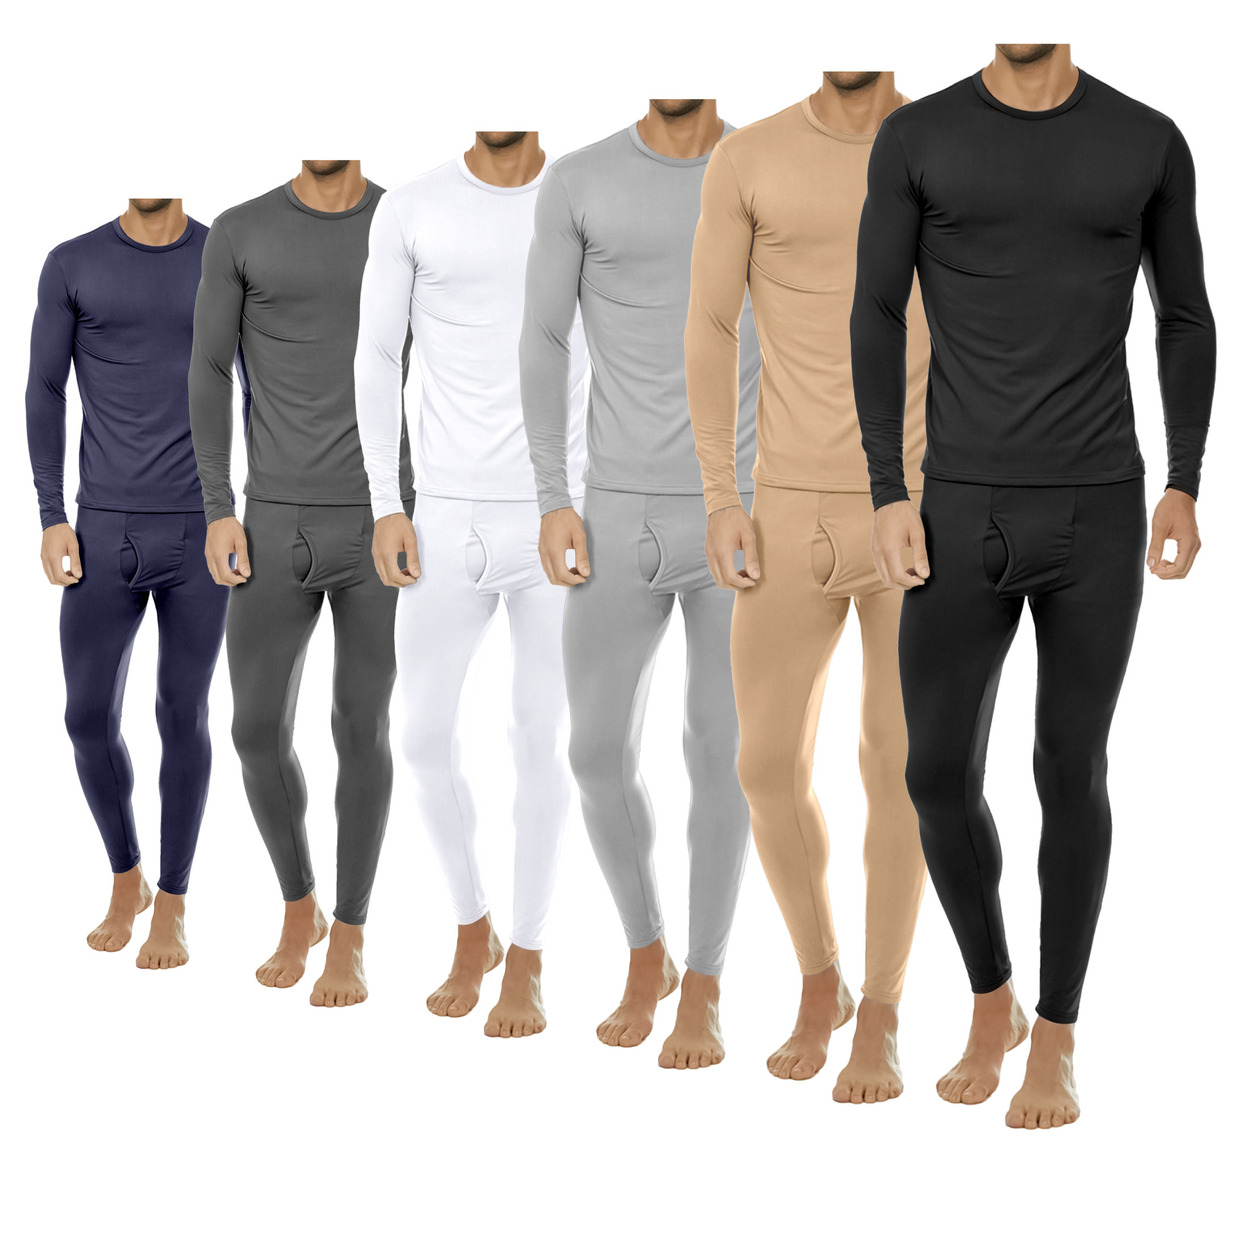 2-Pieces: Men's Winter Warm Fleece Lined Thermal Underwear Set For Cold Weather - Tan, Xx-large